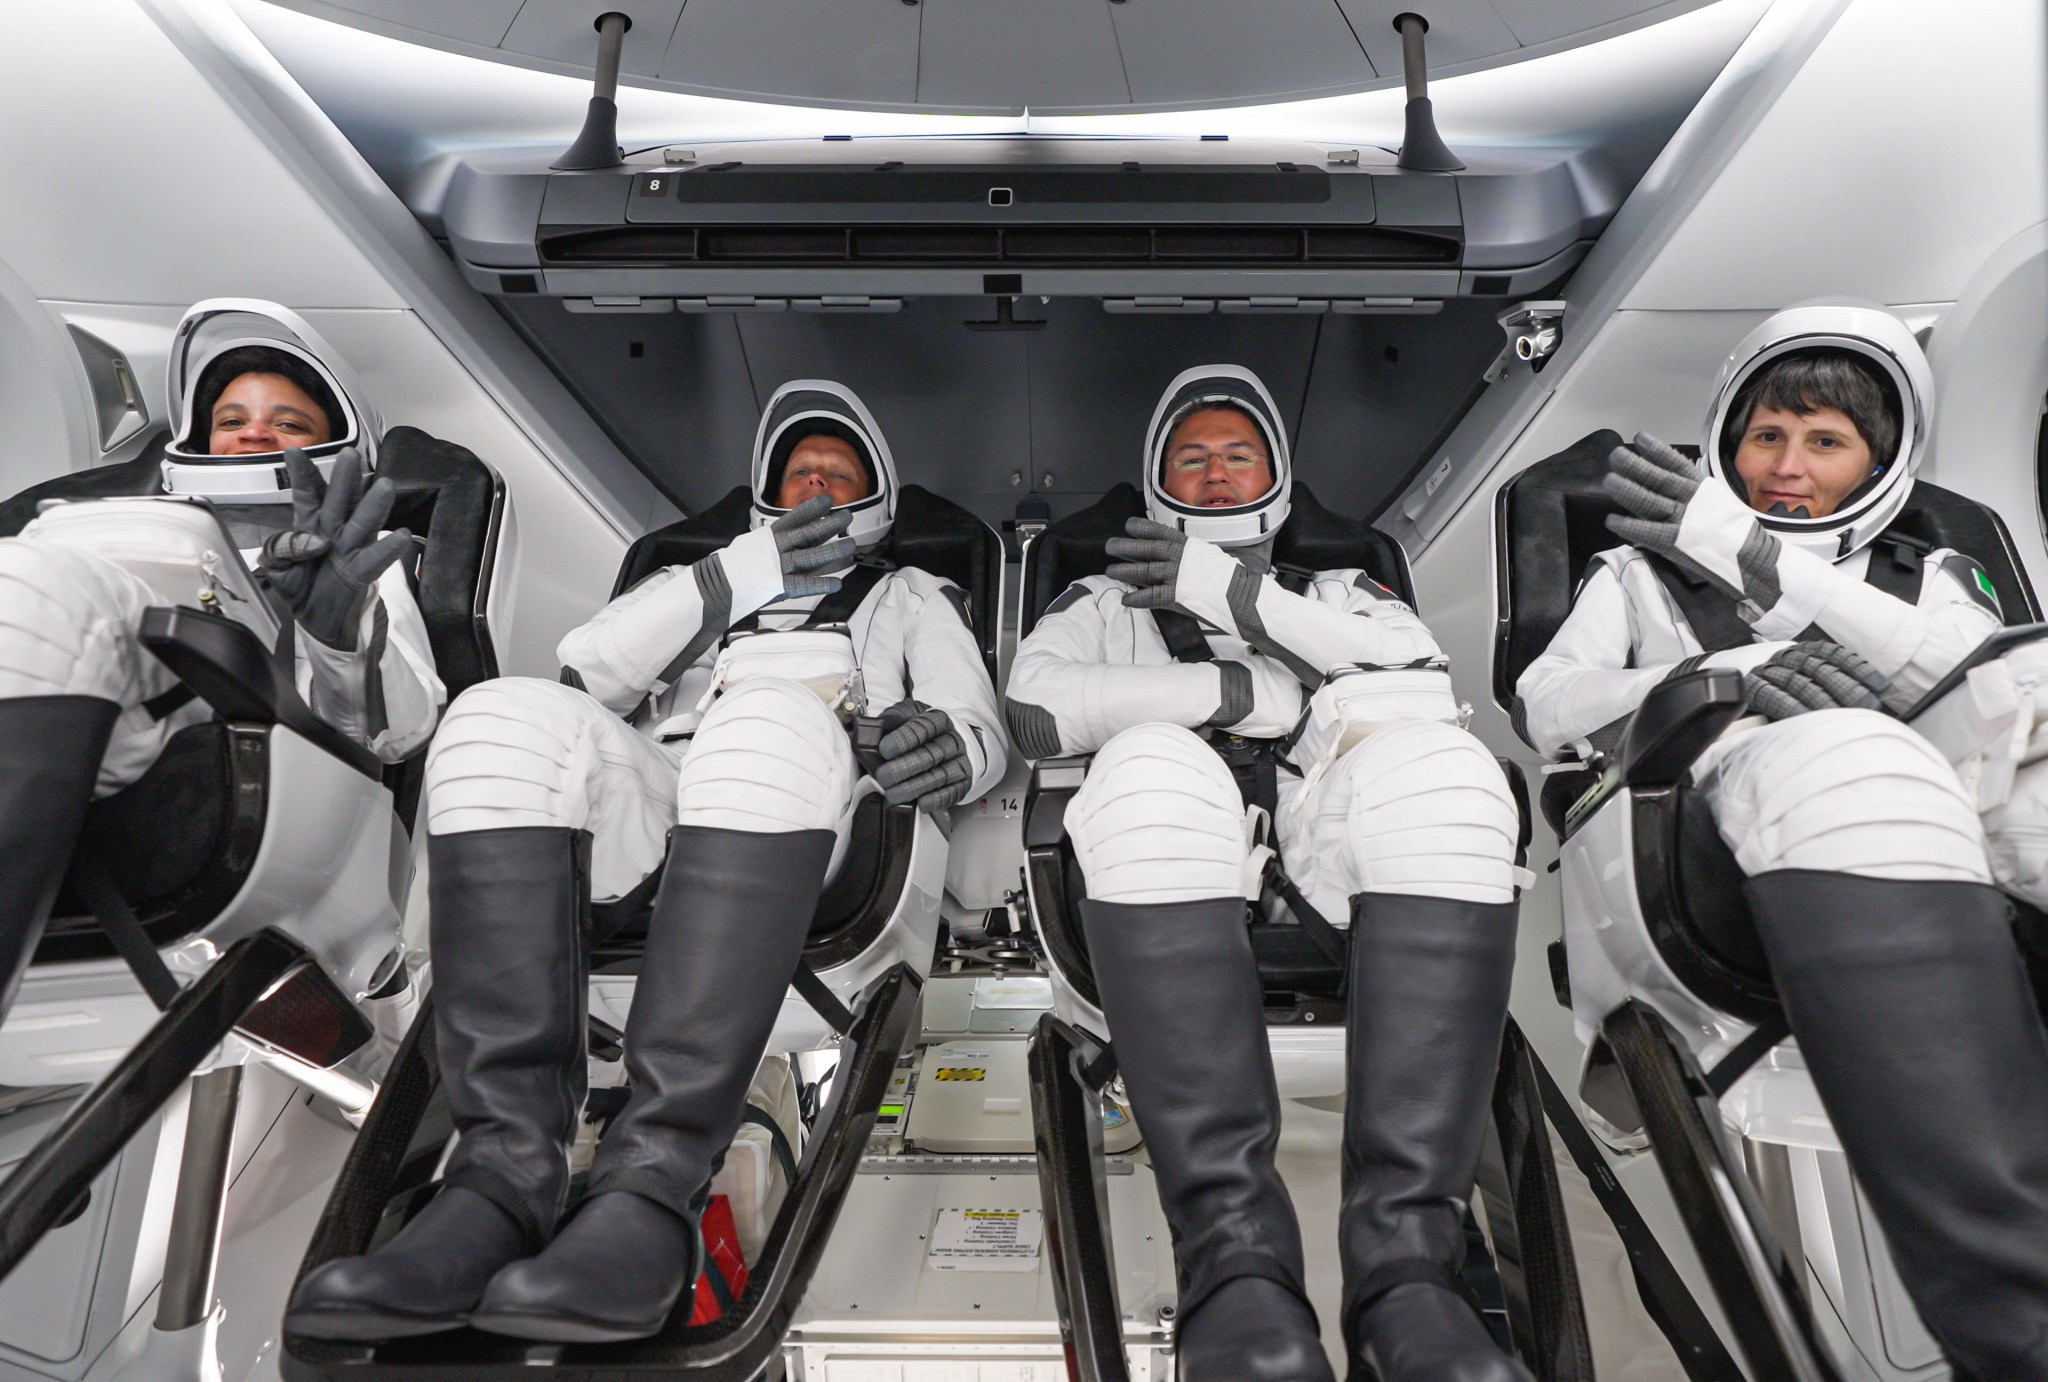 The SpaceX Crew-4 astronauts (from left) are Mission Specialist Jessica watkins, Pilot Robert Hines, Commander Kjell Lindgren, and Mission Specialist Samantha Cristorforetti.